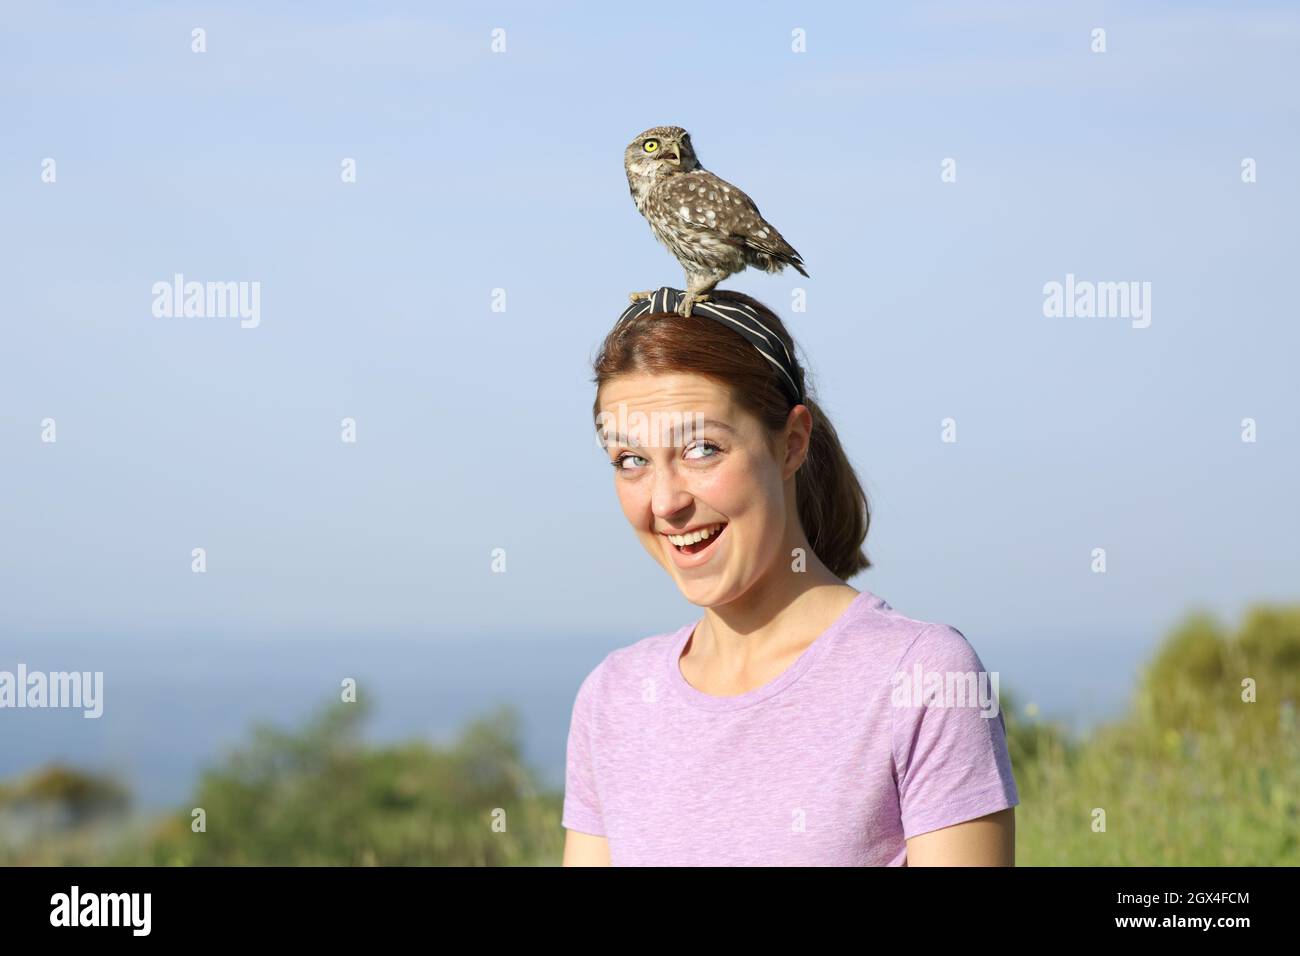 Surprised woman looking at a little owl perched on the head Stock Photo